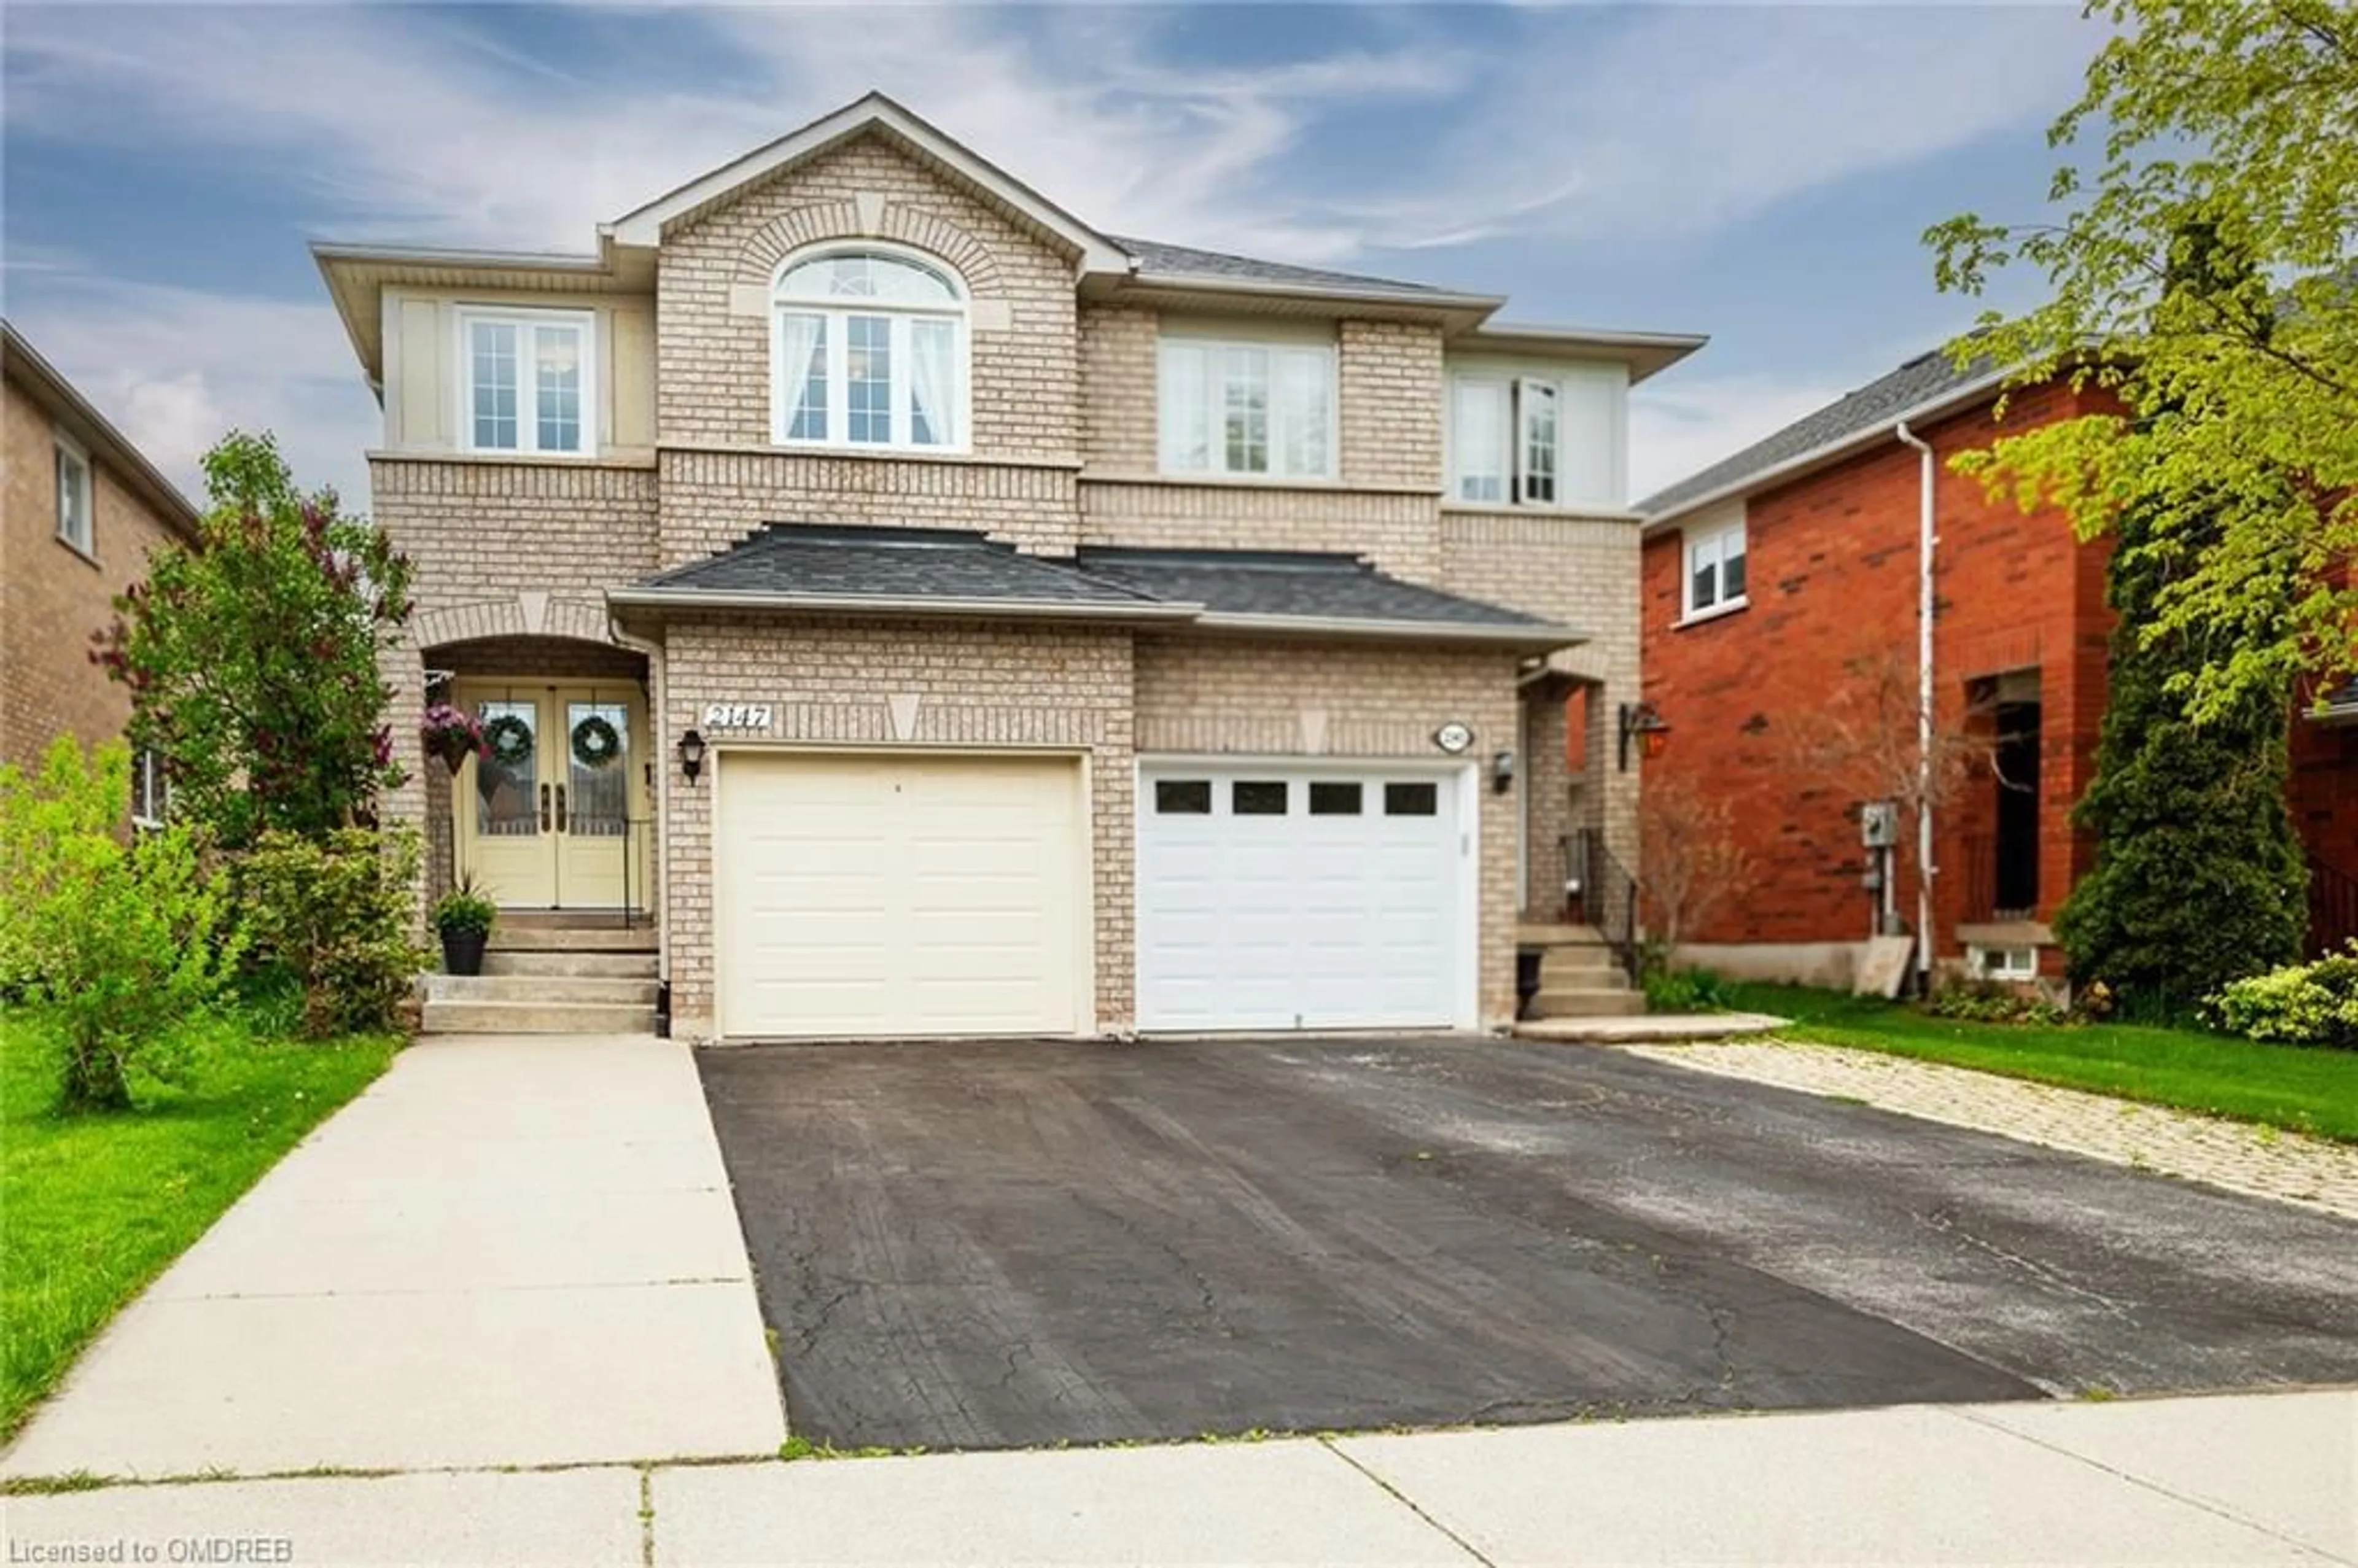 Home with brick exterior material for 2147 Shady Glen Rd, Oakville Ontario L6M 3N7